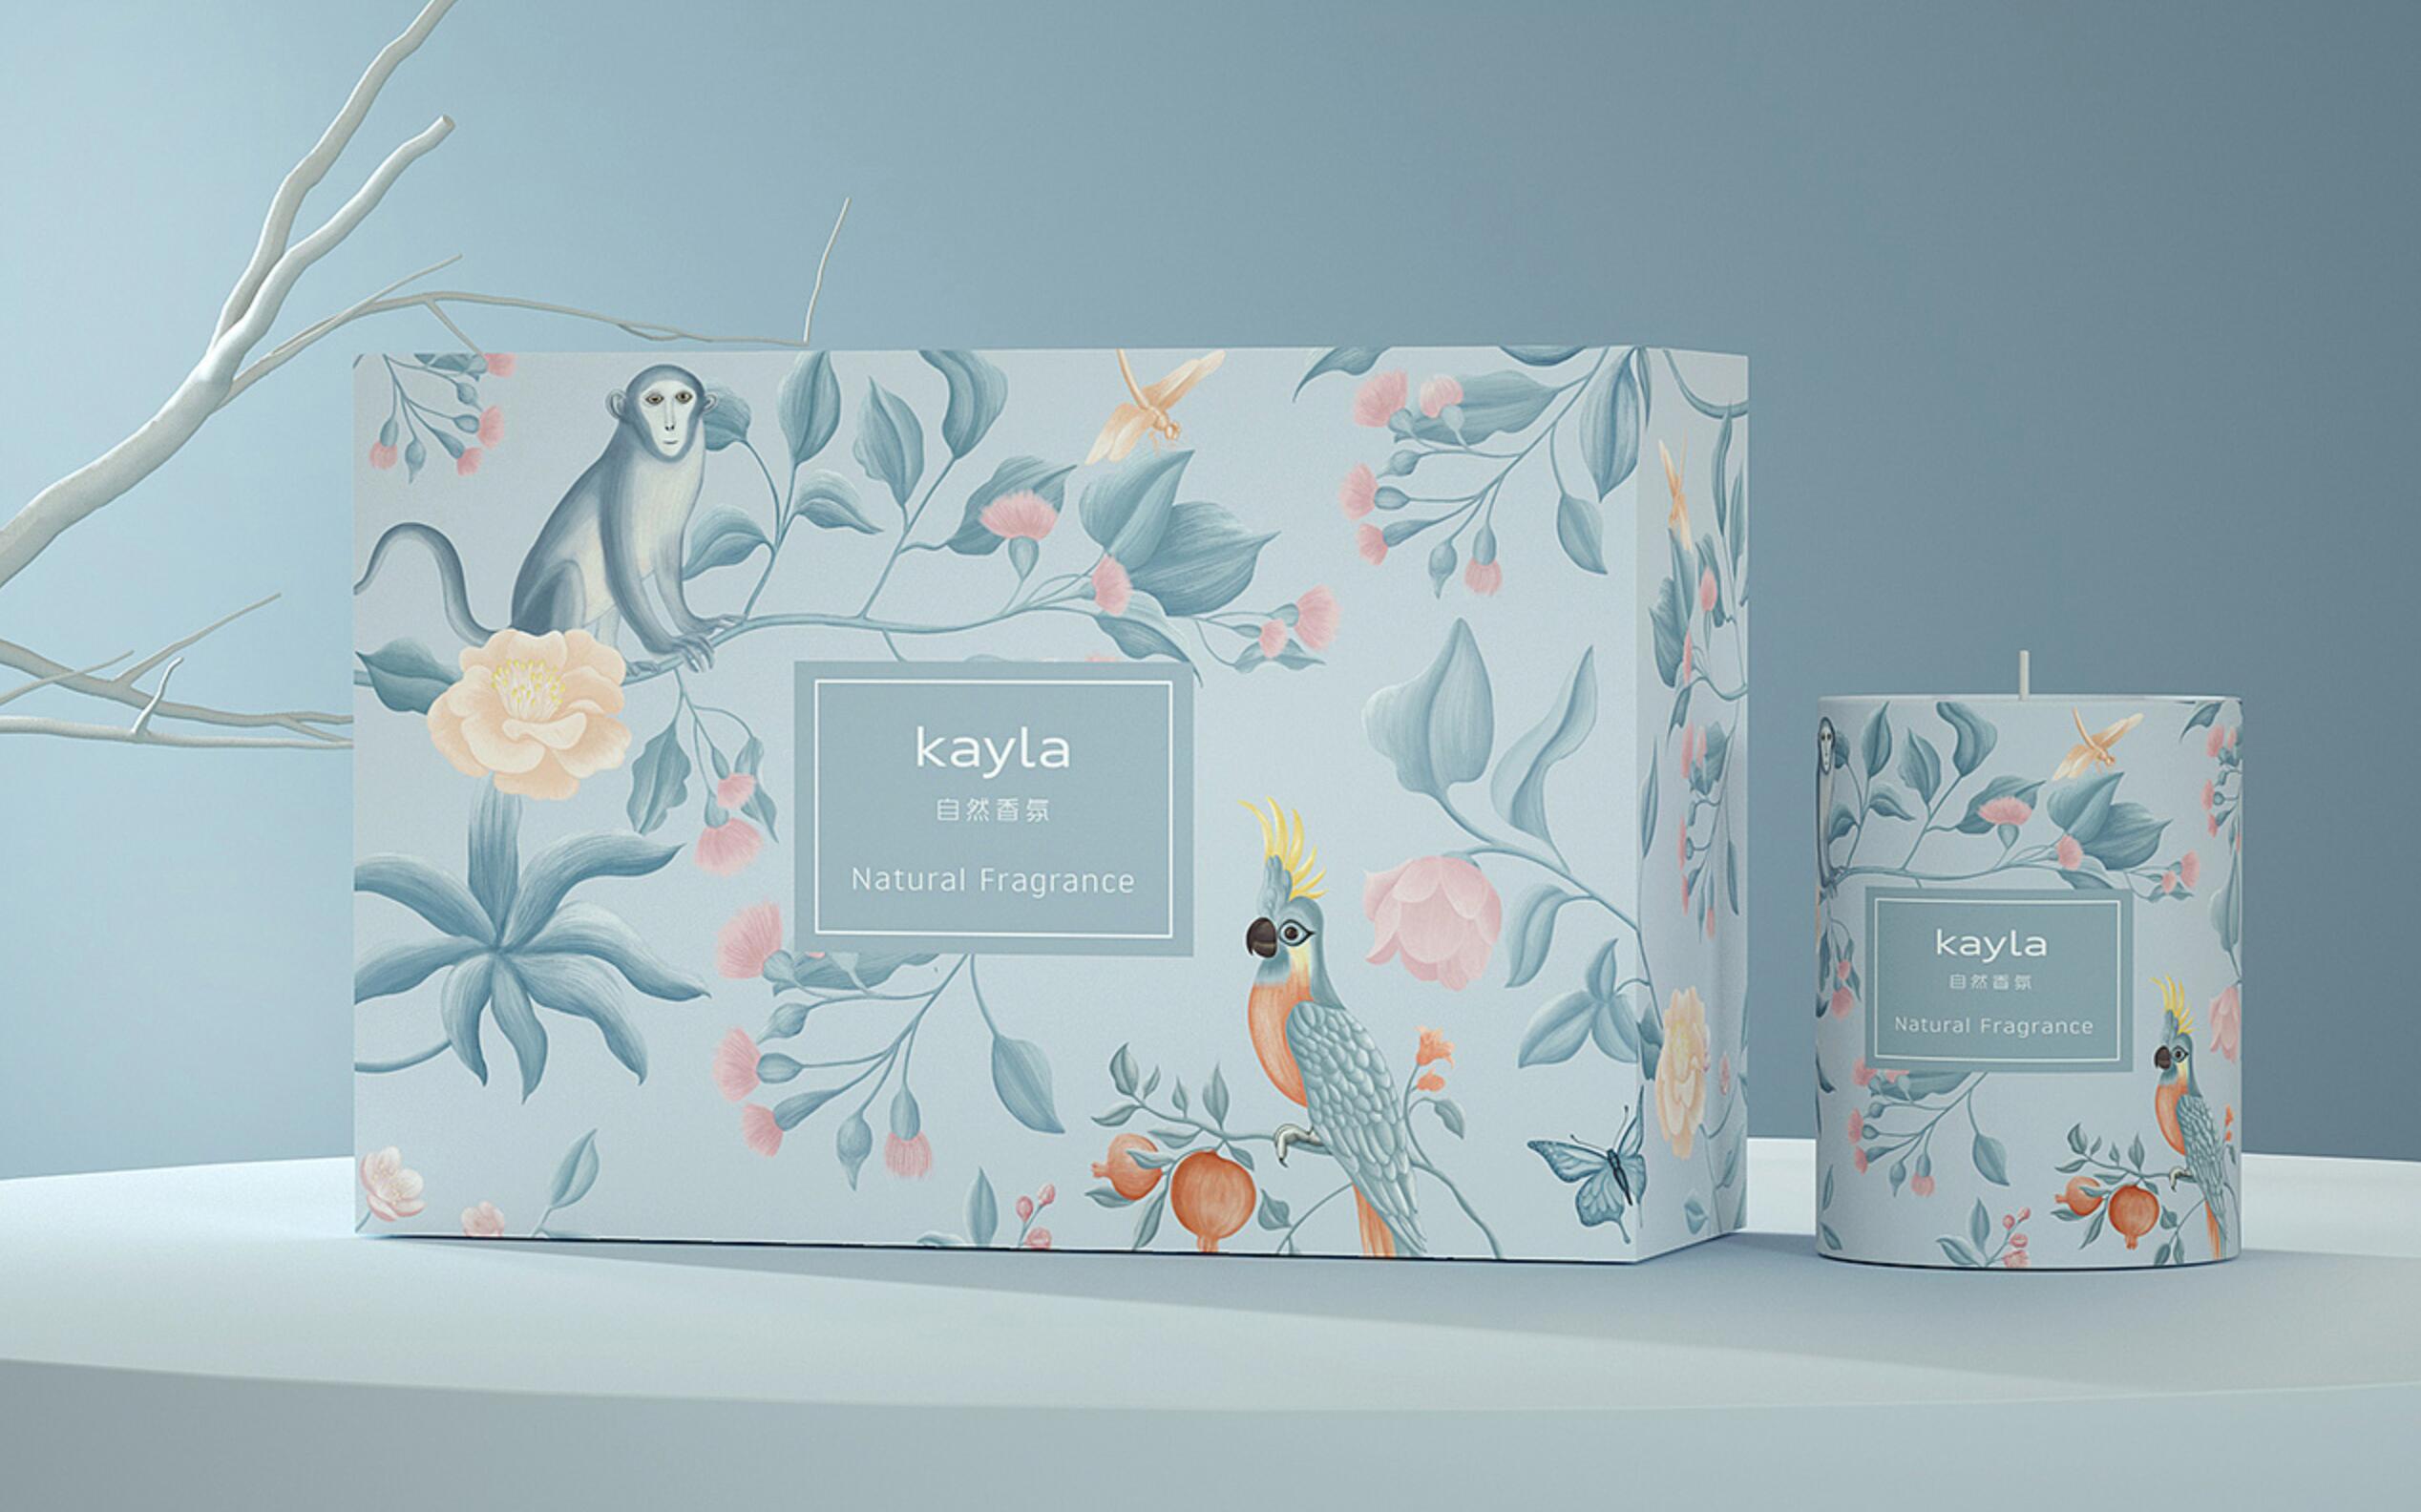 Application of Eco-friendly Materials in Gift Box Packaging Design